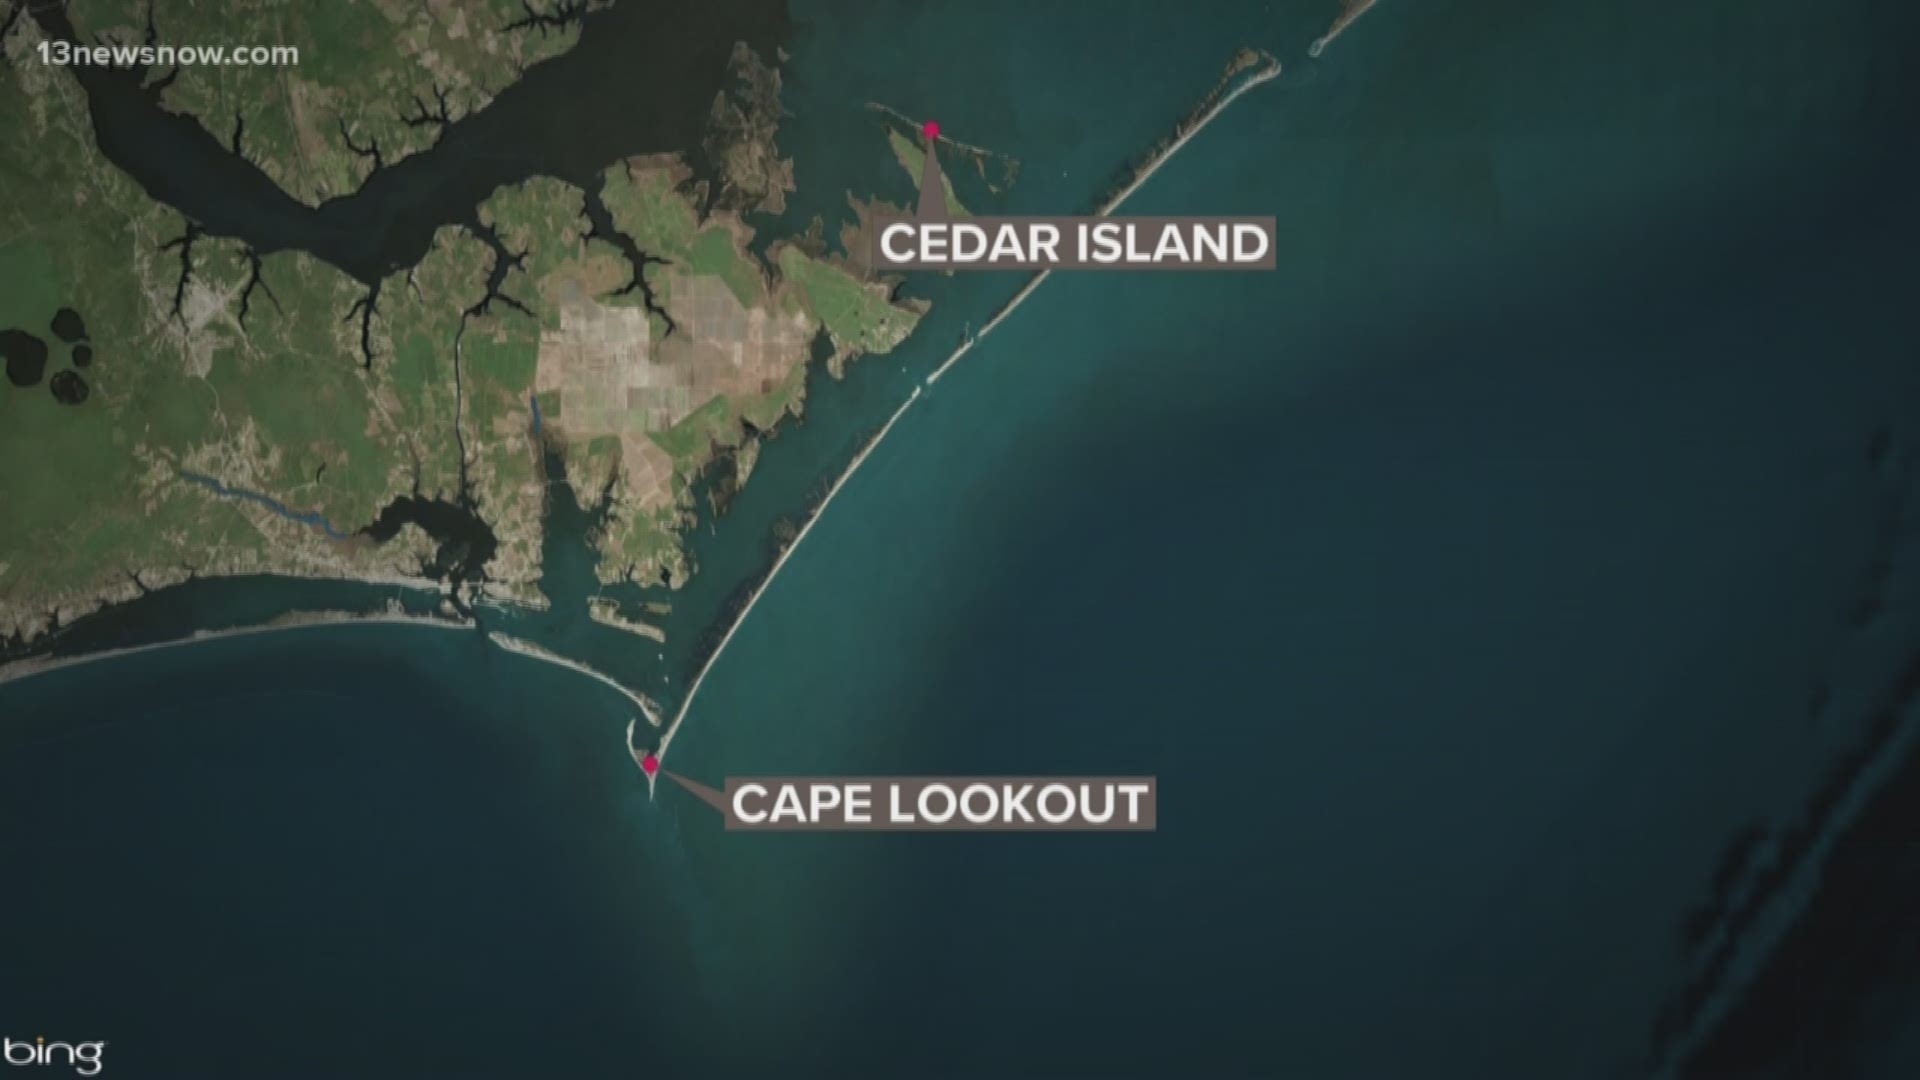 Three cows from Cedar Island washed up on Cape Lookout. Officials believe the cows swam up to 5 miles after they were washed away by Hurricane Dorian.